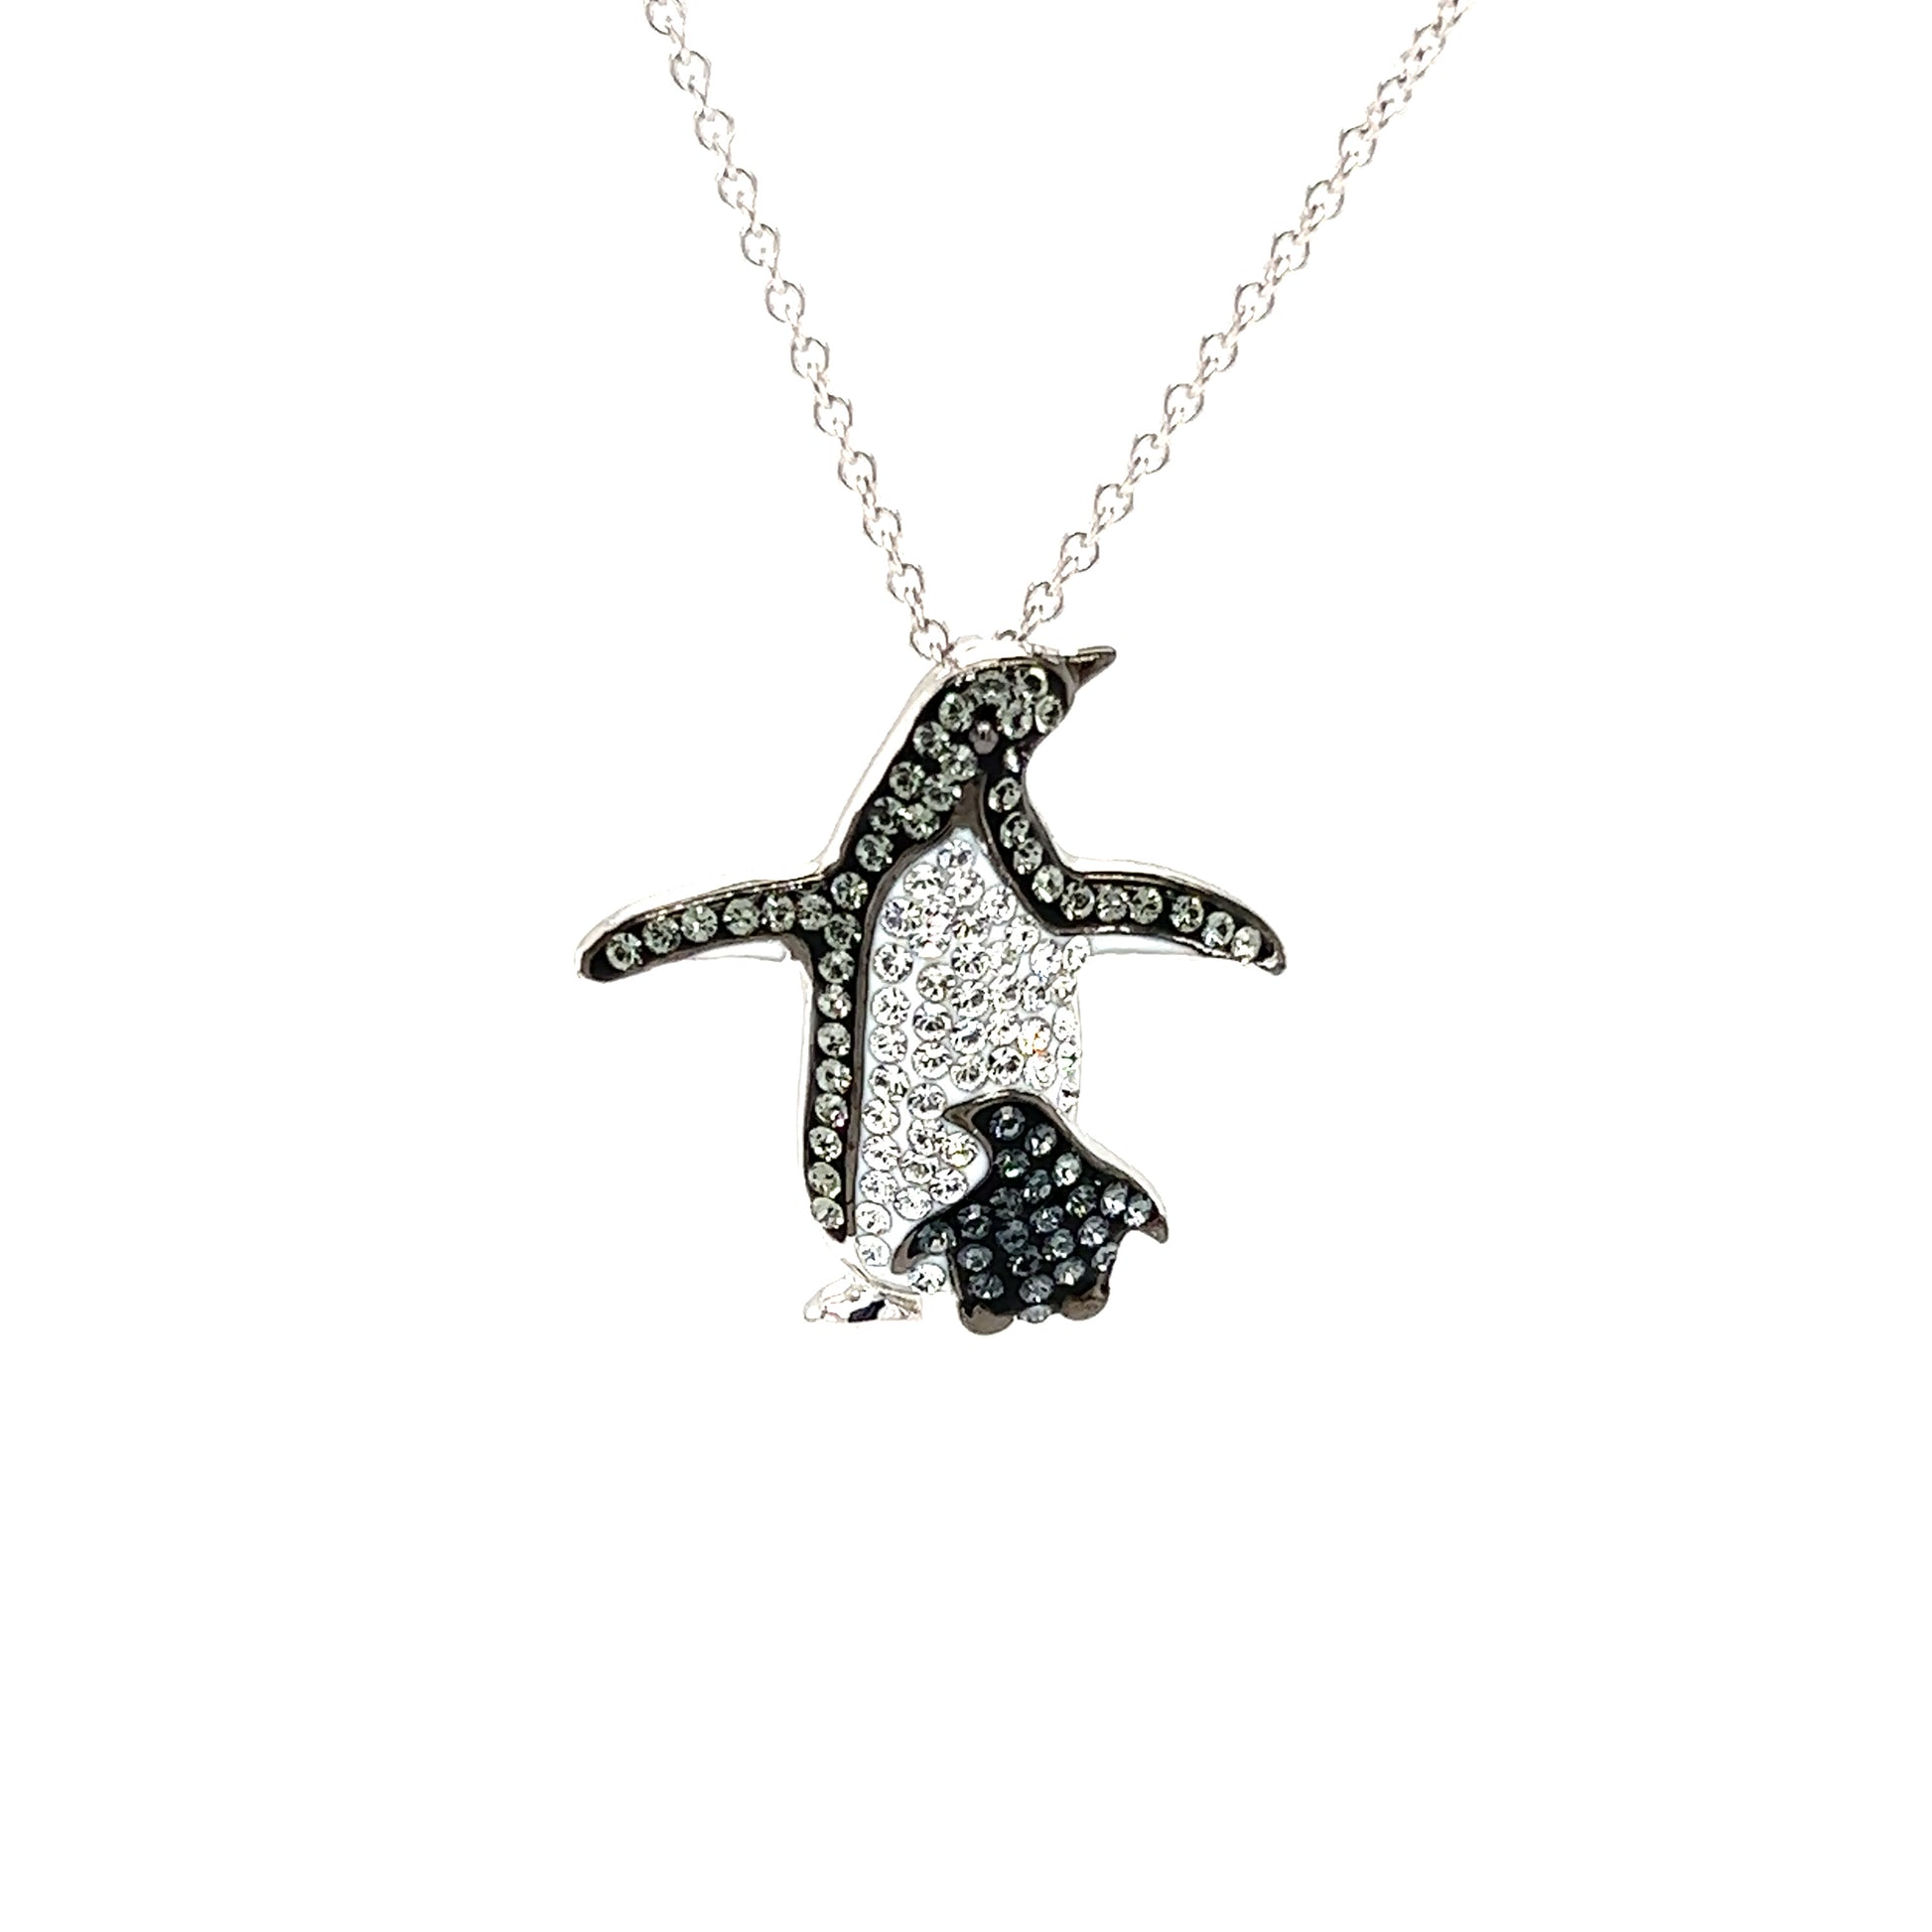 Penguin and Baby Necklace with Crystals in Sterling Silver Pendant Front View